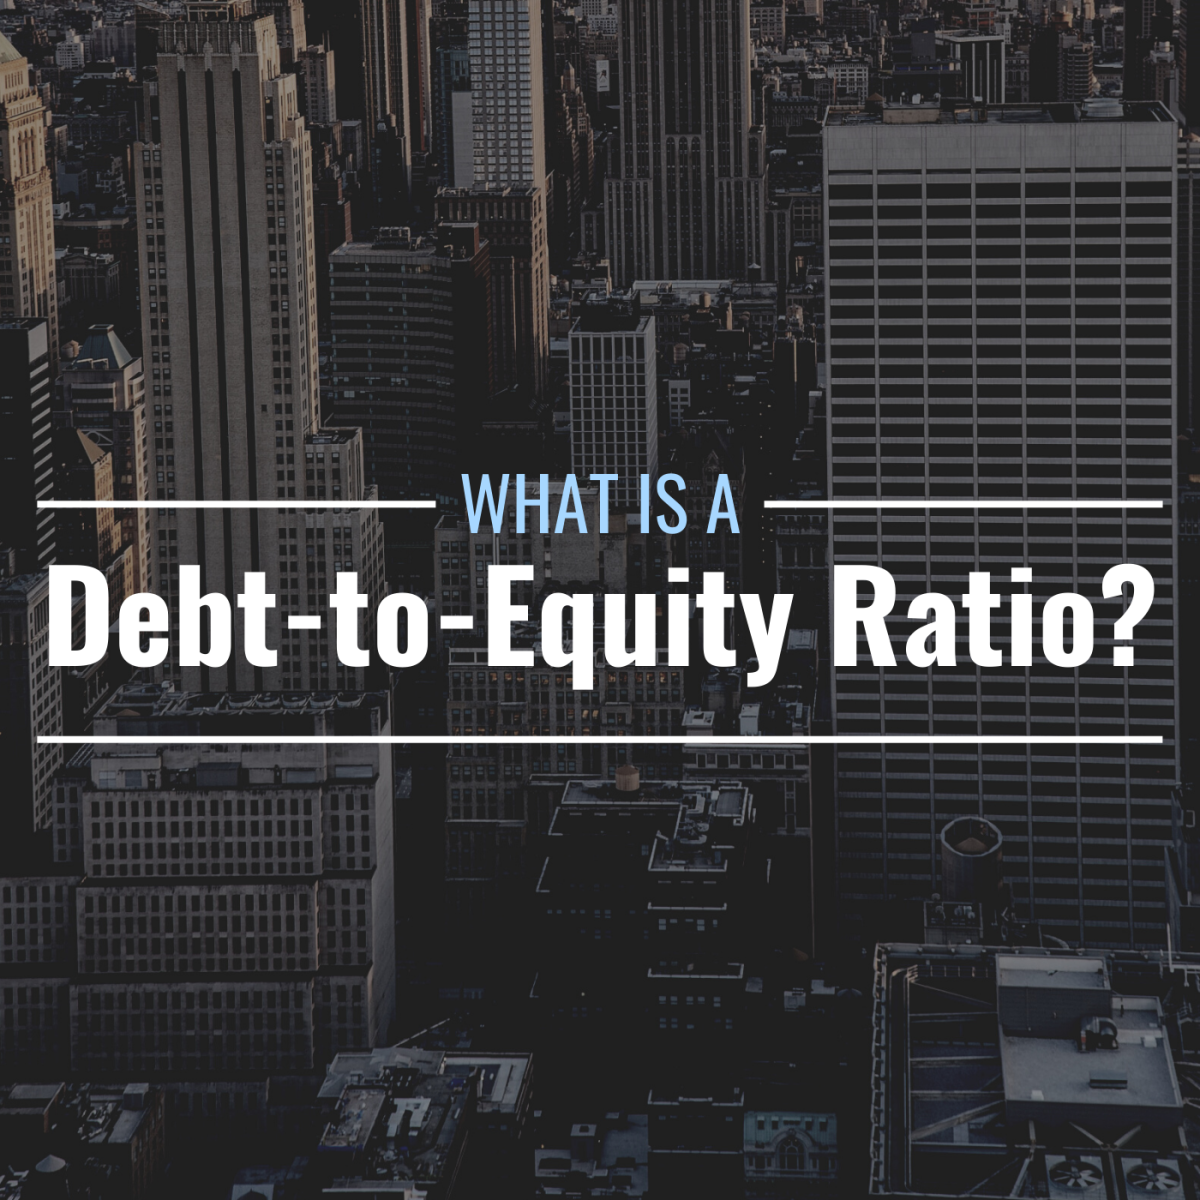 Darkened photo of tall buildings in downtown New York City with text overlay that reads "What Is a Debt-to-Equity Ratio?" Nelson